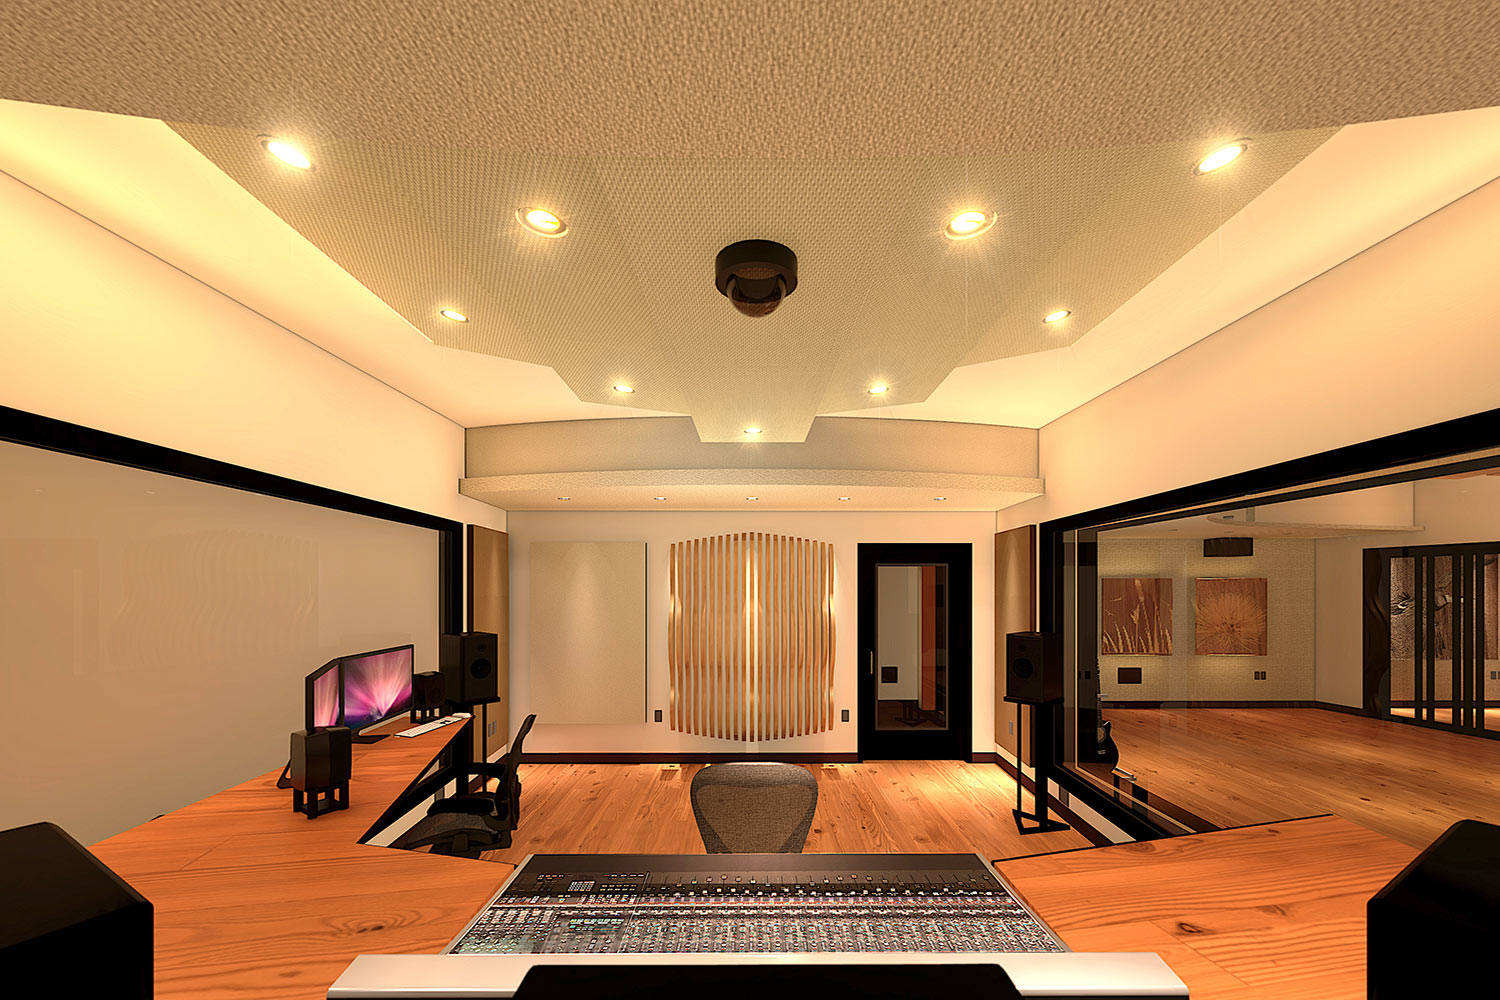 One of Hawaii’s only schools providing students with both pro audio and pro video production training, the Washington Middle School reached out to WSDG to create a state-of-the-art dual-purpose teaching studio. Control room back view render.